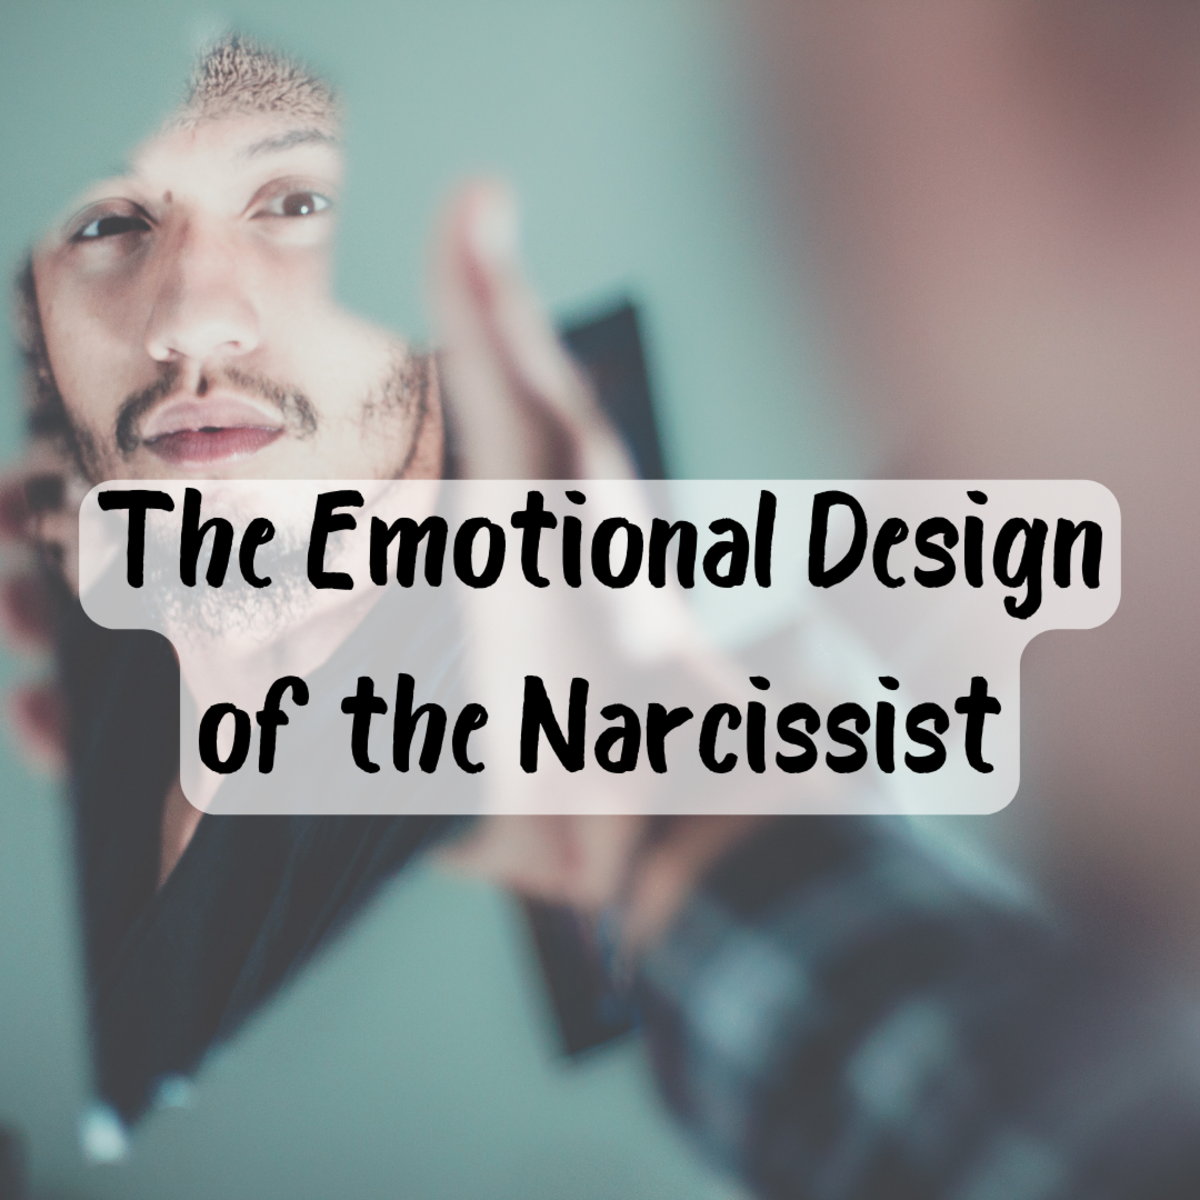 The Emotional Design of the Narcissist